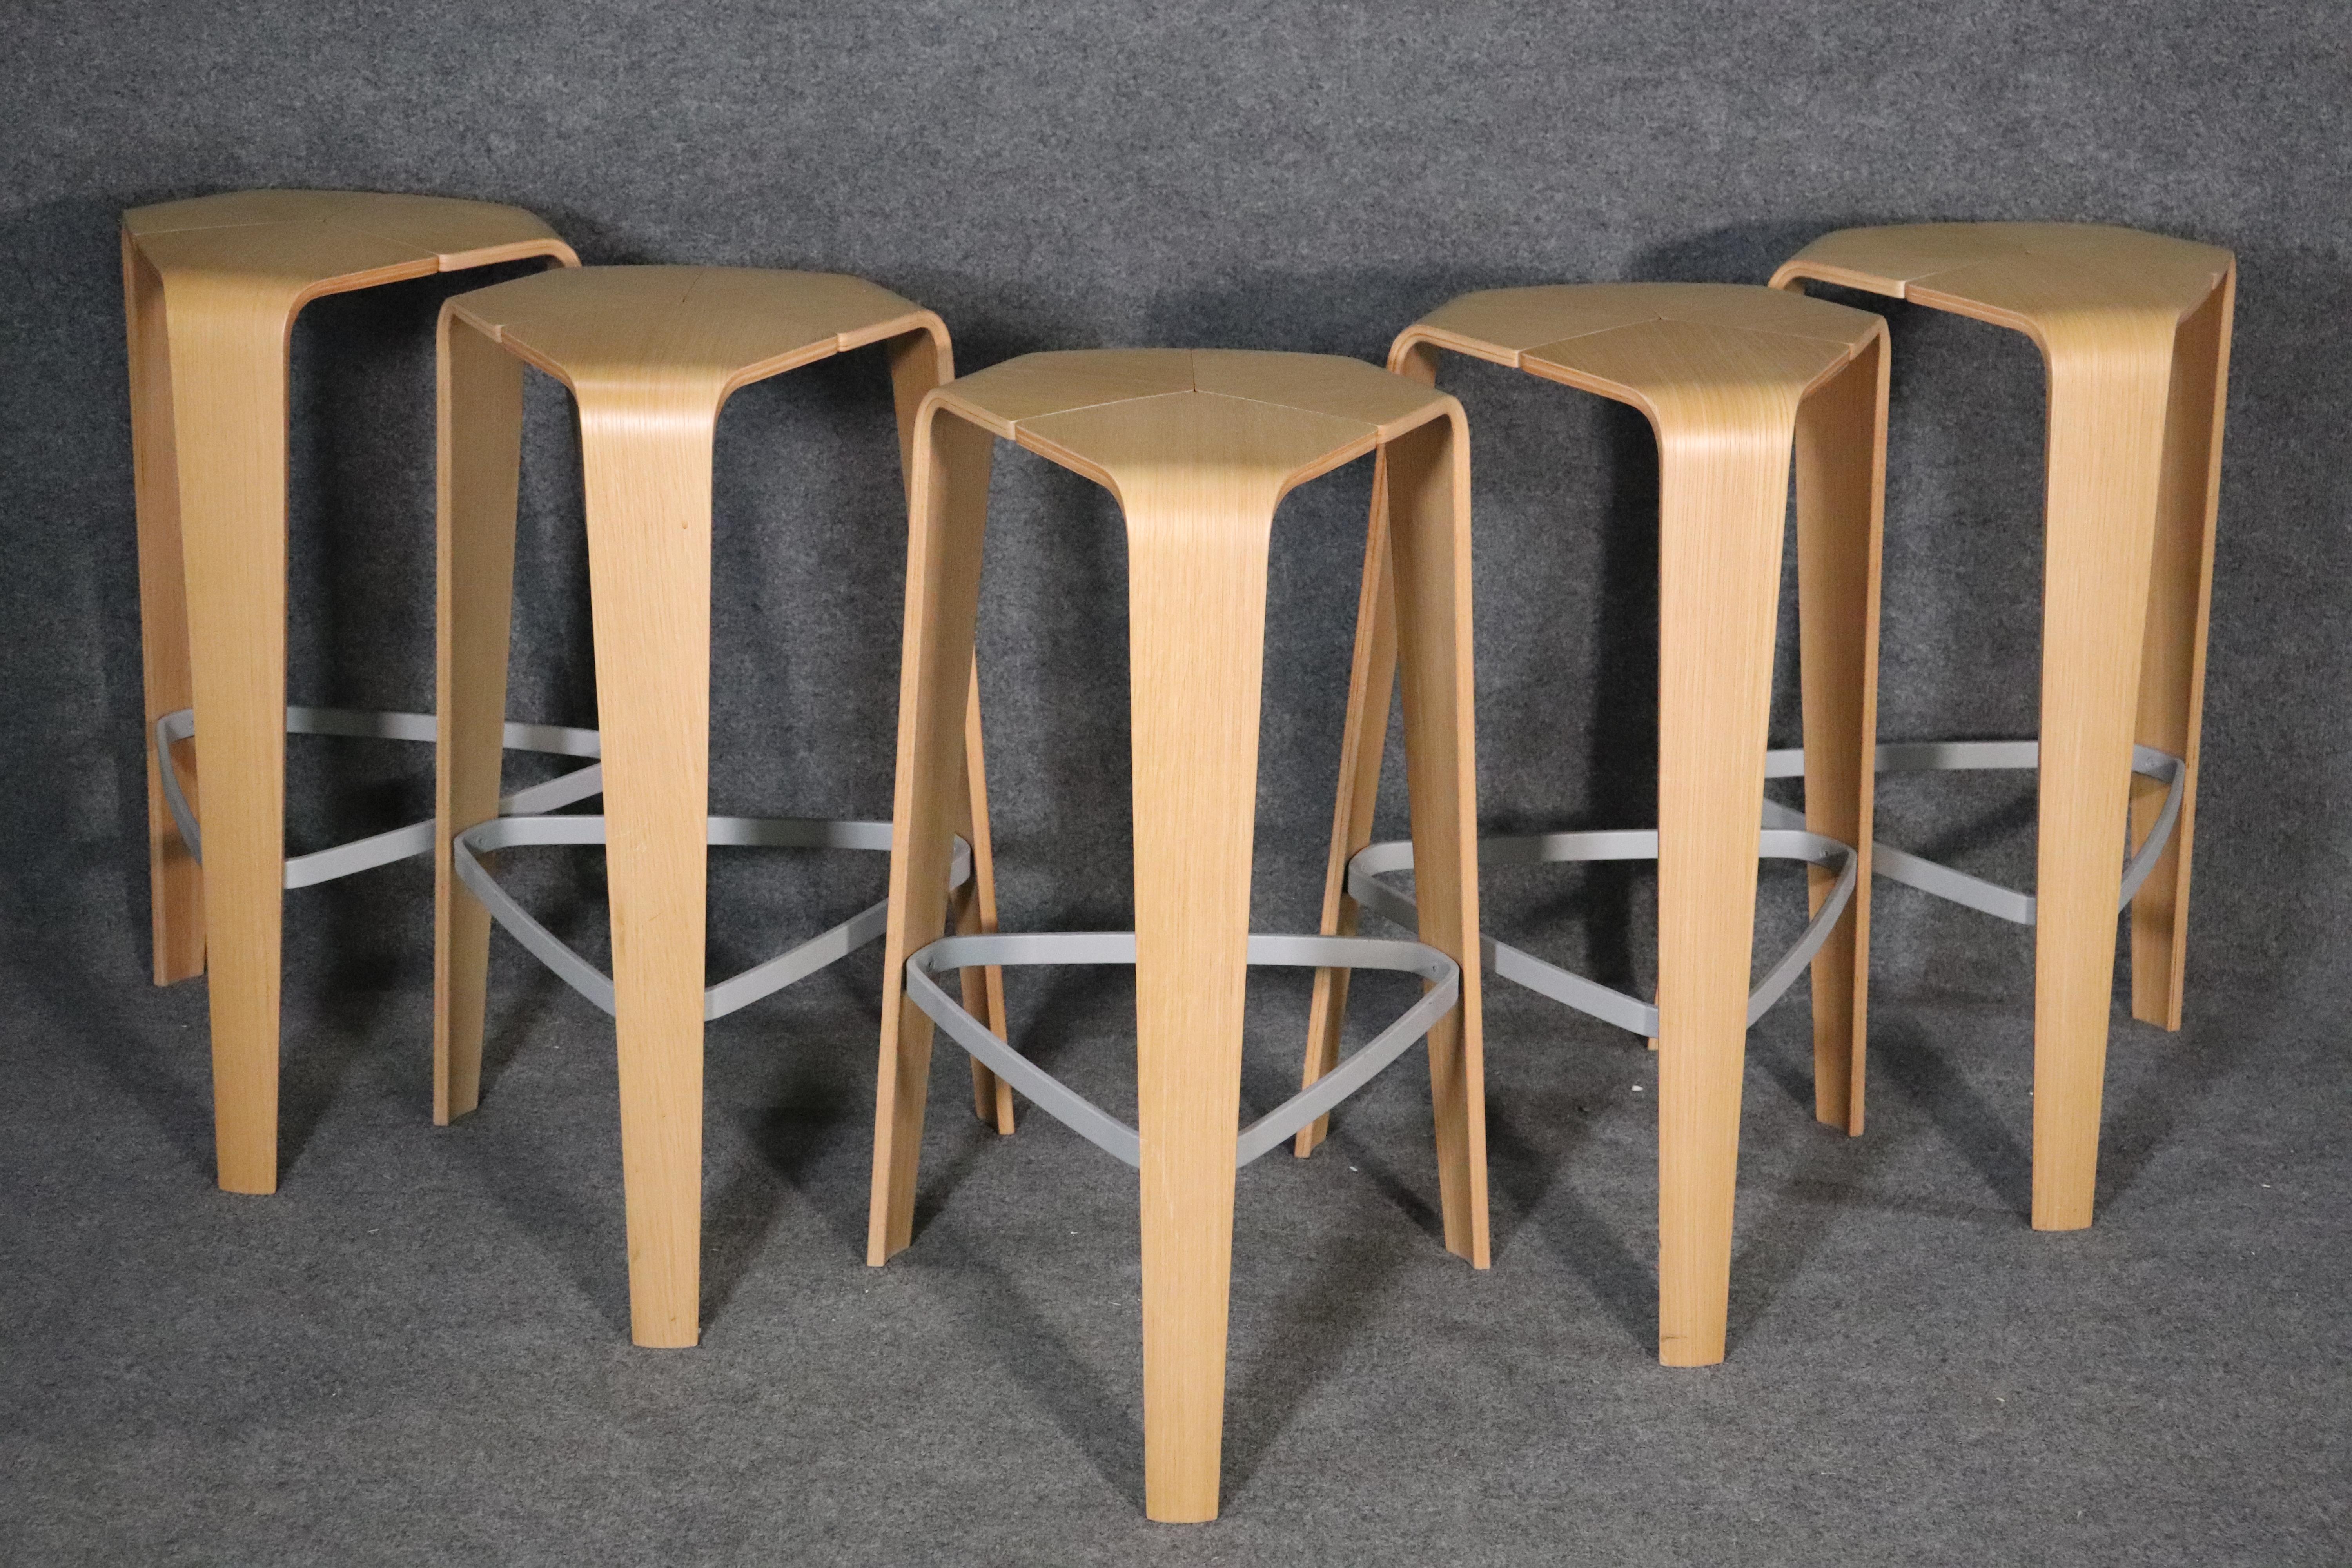 Listing is for 2 stools. Pair of bentwood stools by David Furniture. Features molded plywood, connecting three separate and identical pieces to make a geometrical pleasing design.
Please confirm location NY or NJ.